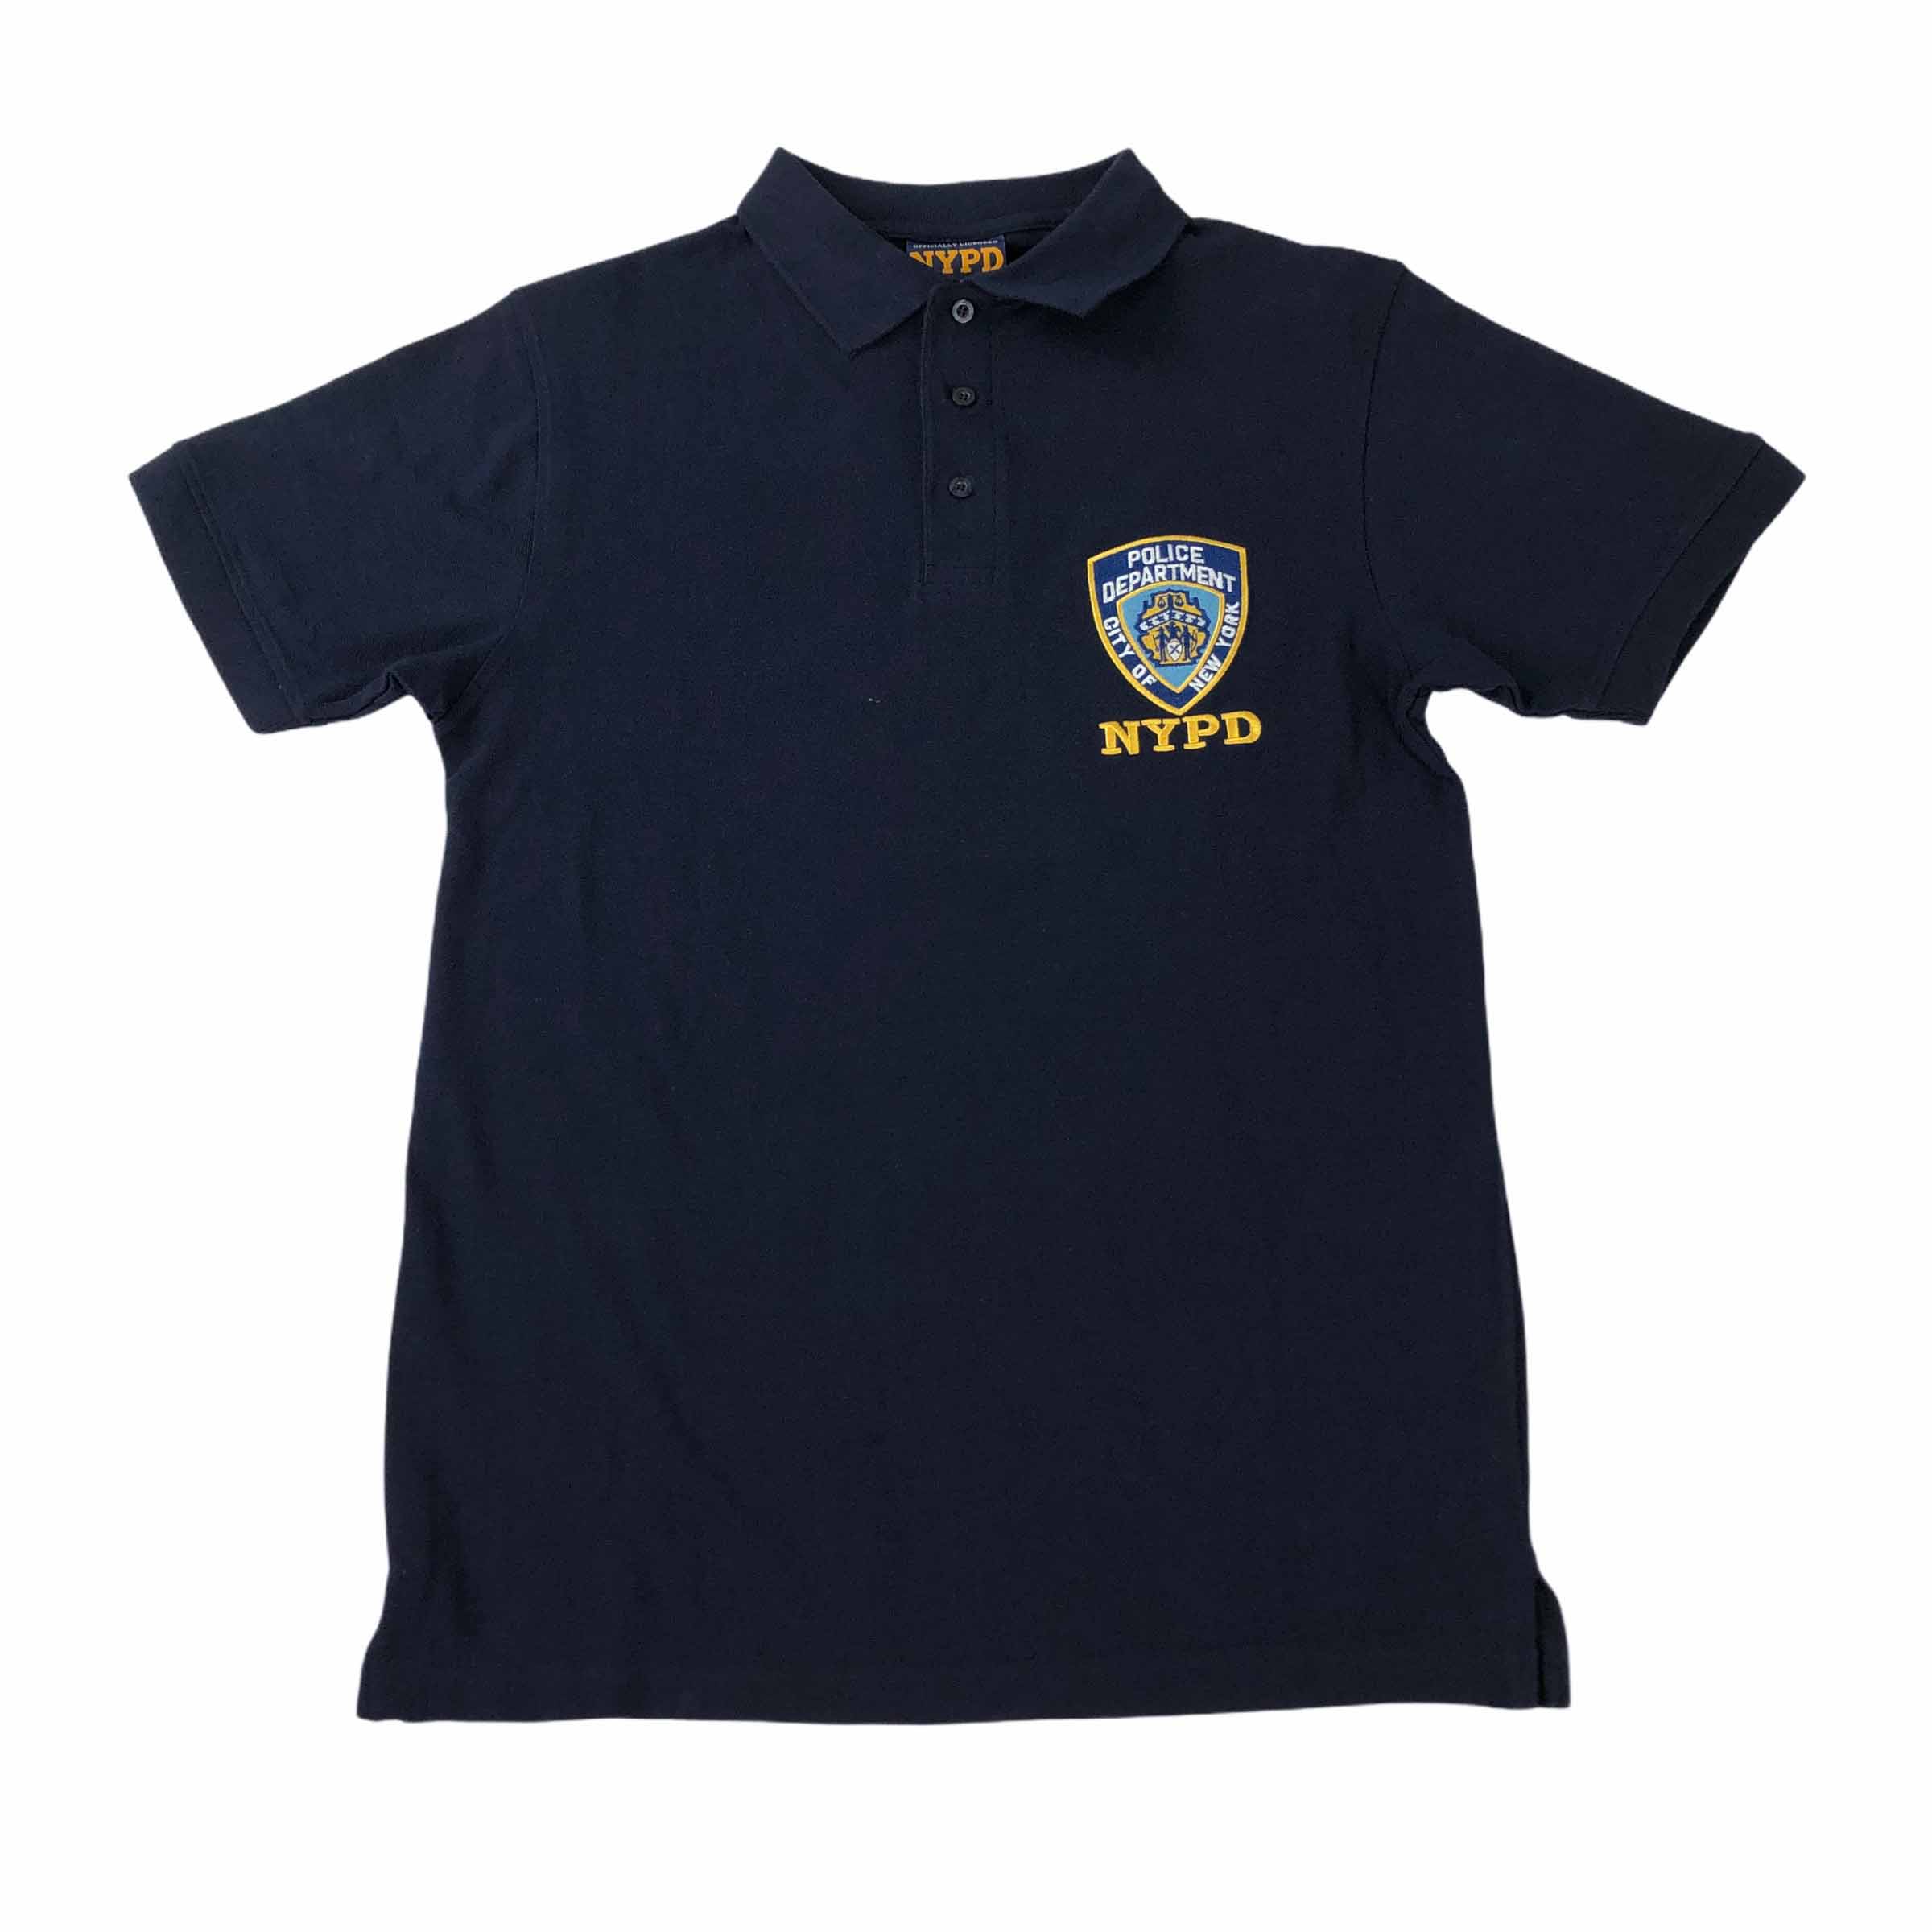 [NYPD] Polo Tshirt NV - Size S